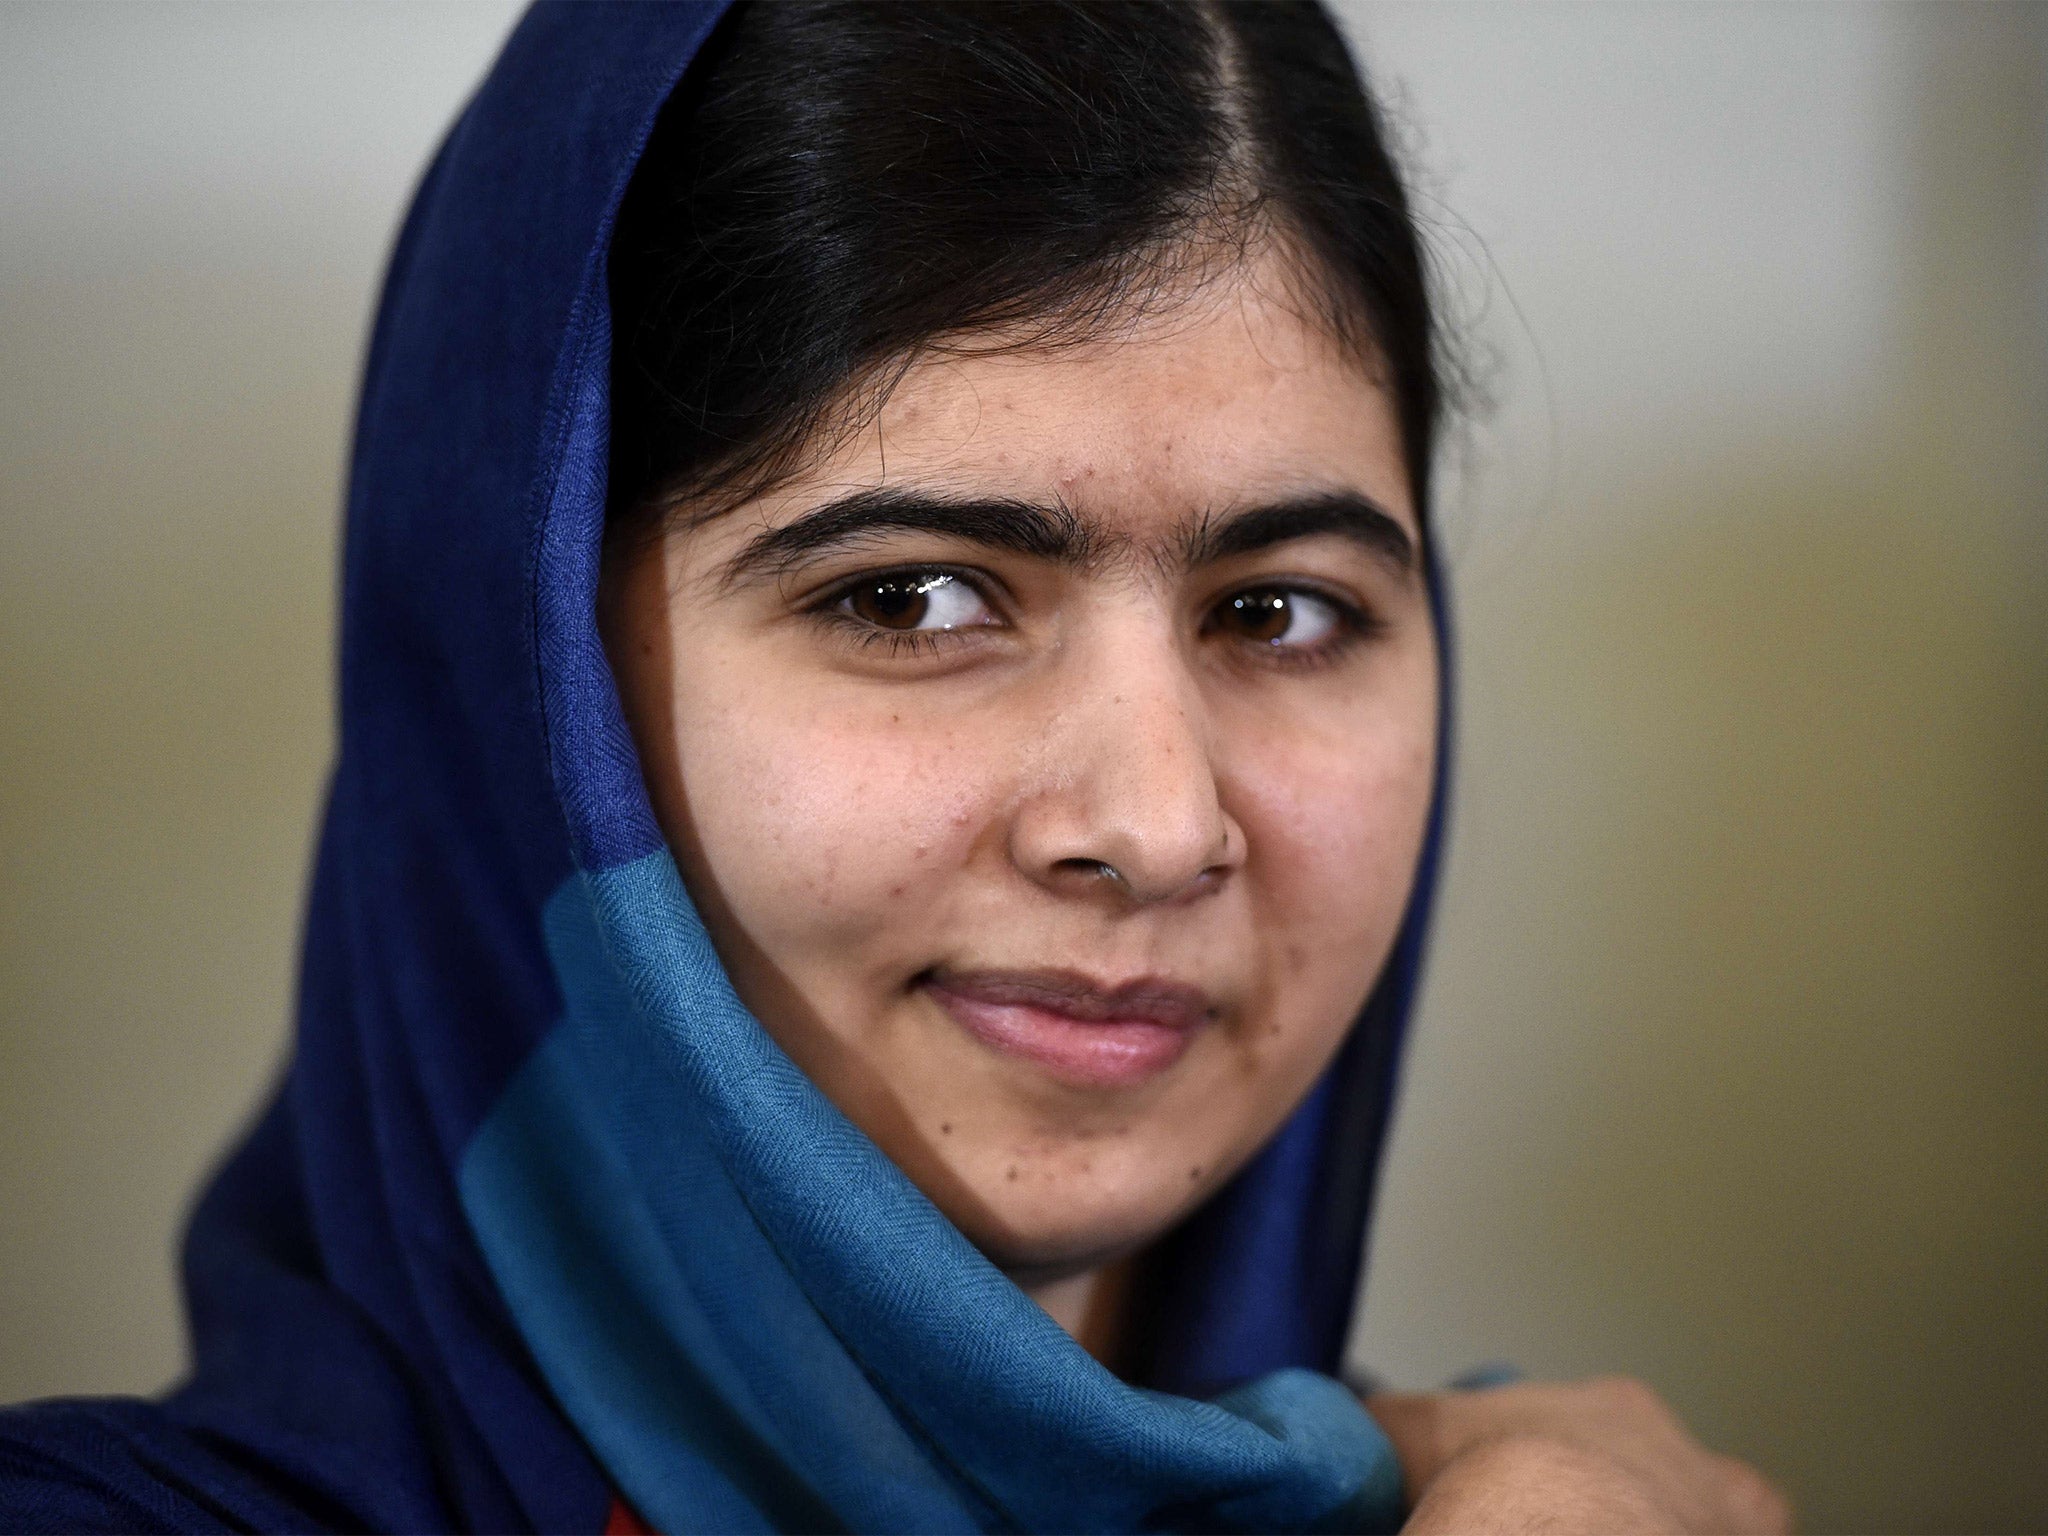 Nobel Peace Prize laureate Malala Yousafzai attends a press conference on Tuesday at the Norwegian Nobel Institute in Oslo ahead of the ceremony to present her with the award